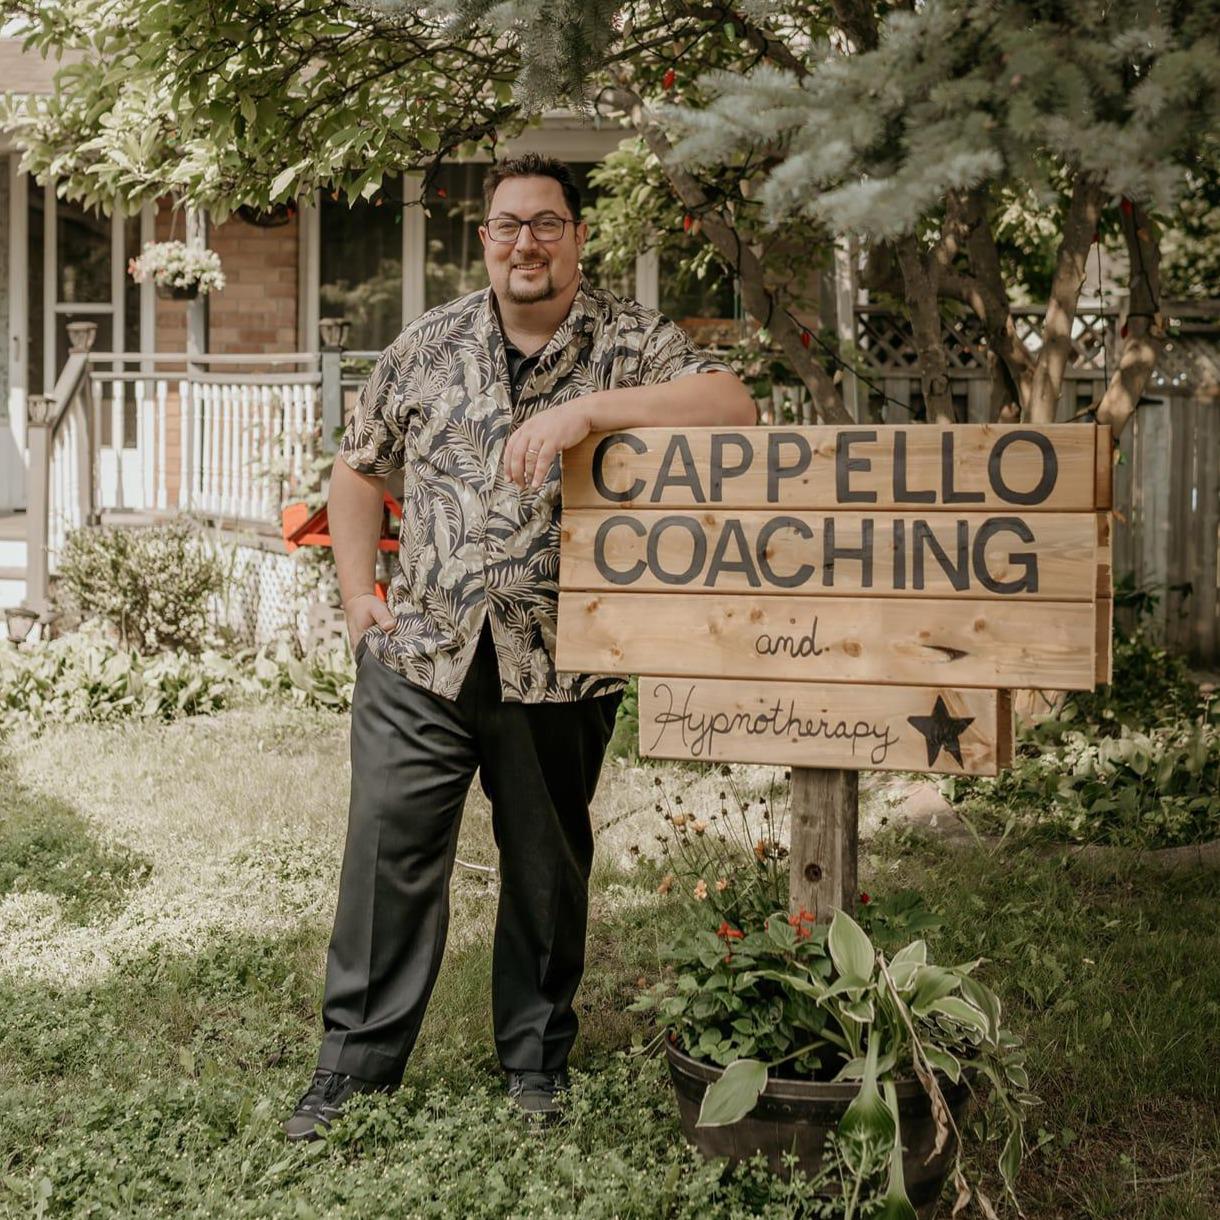 Cappello Coaching and Hypnotherapy